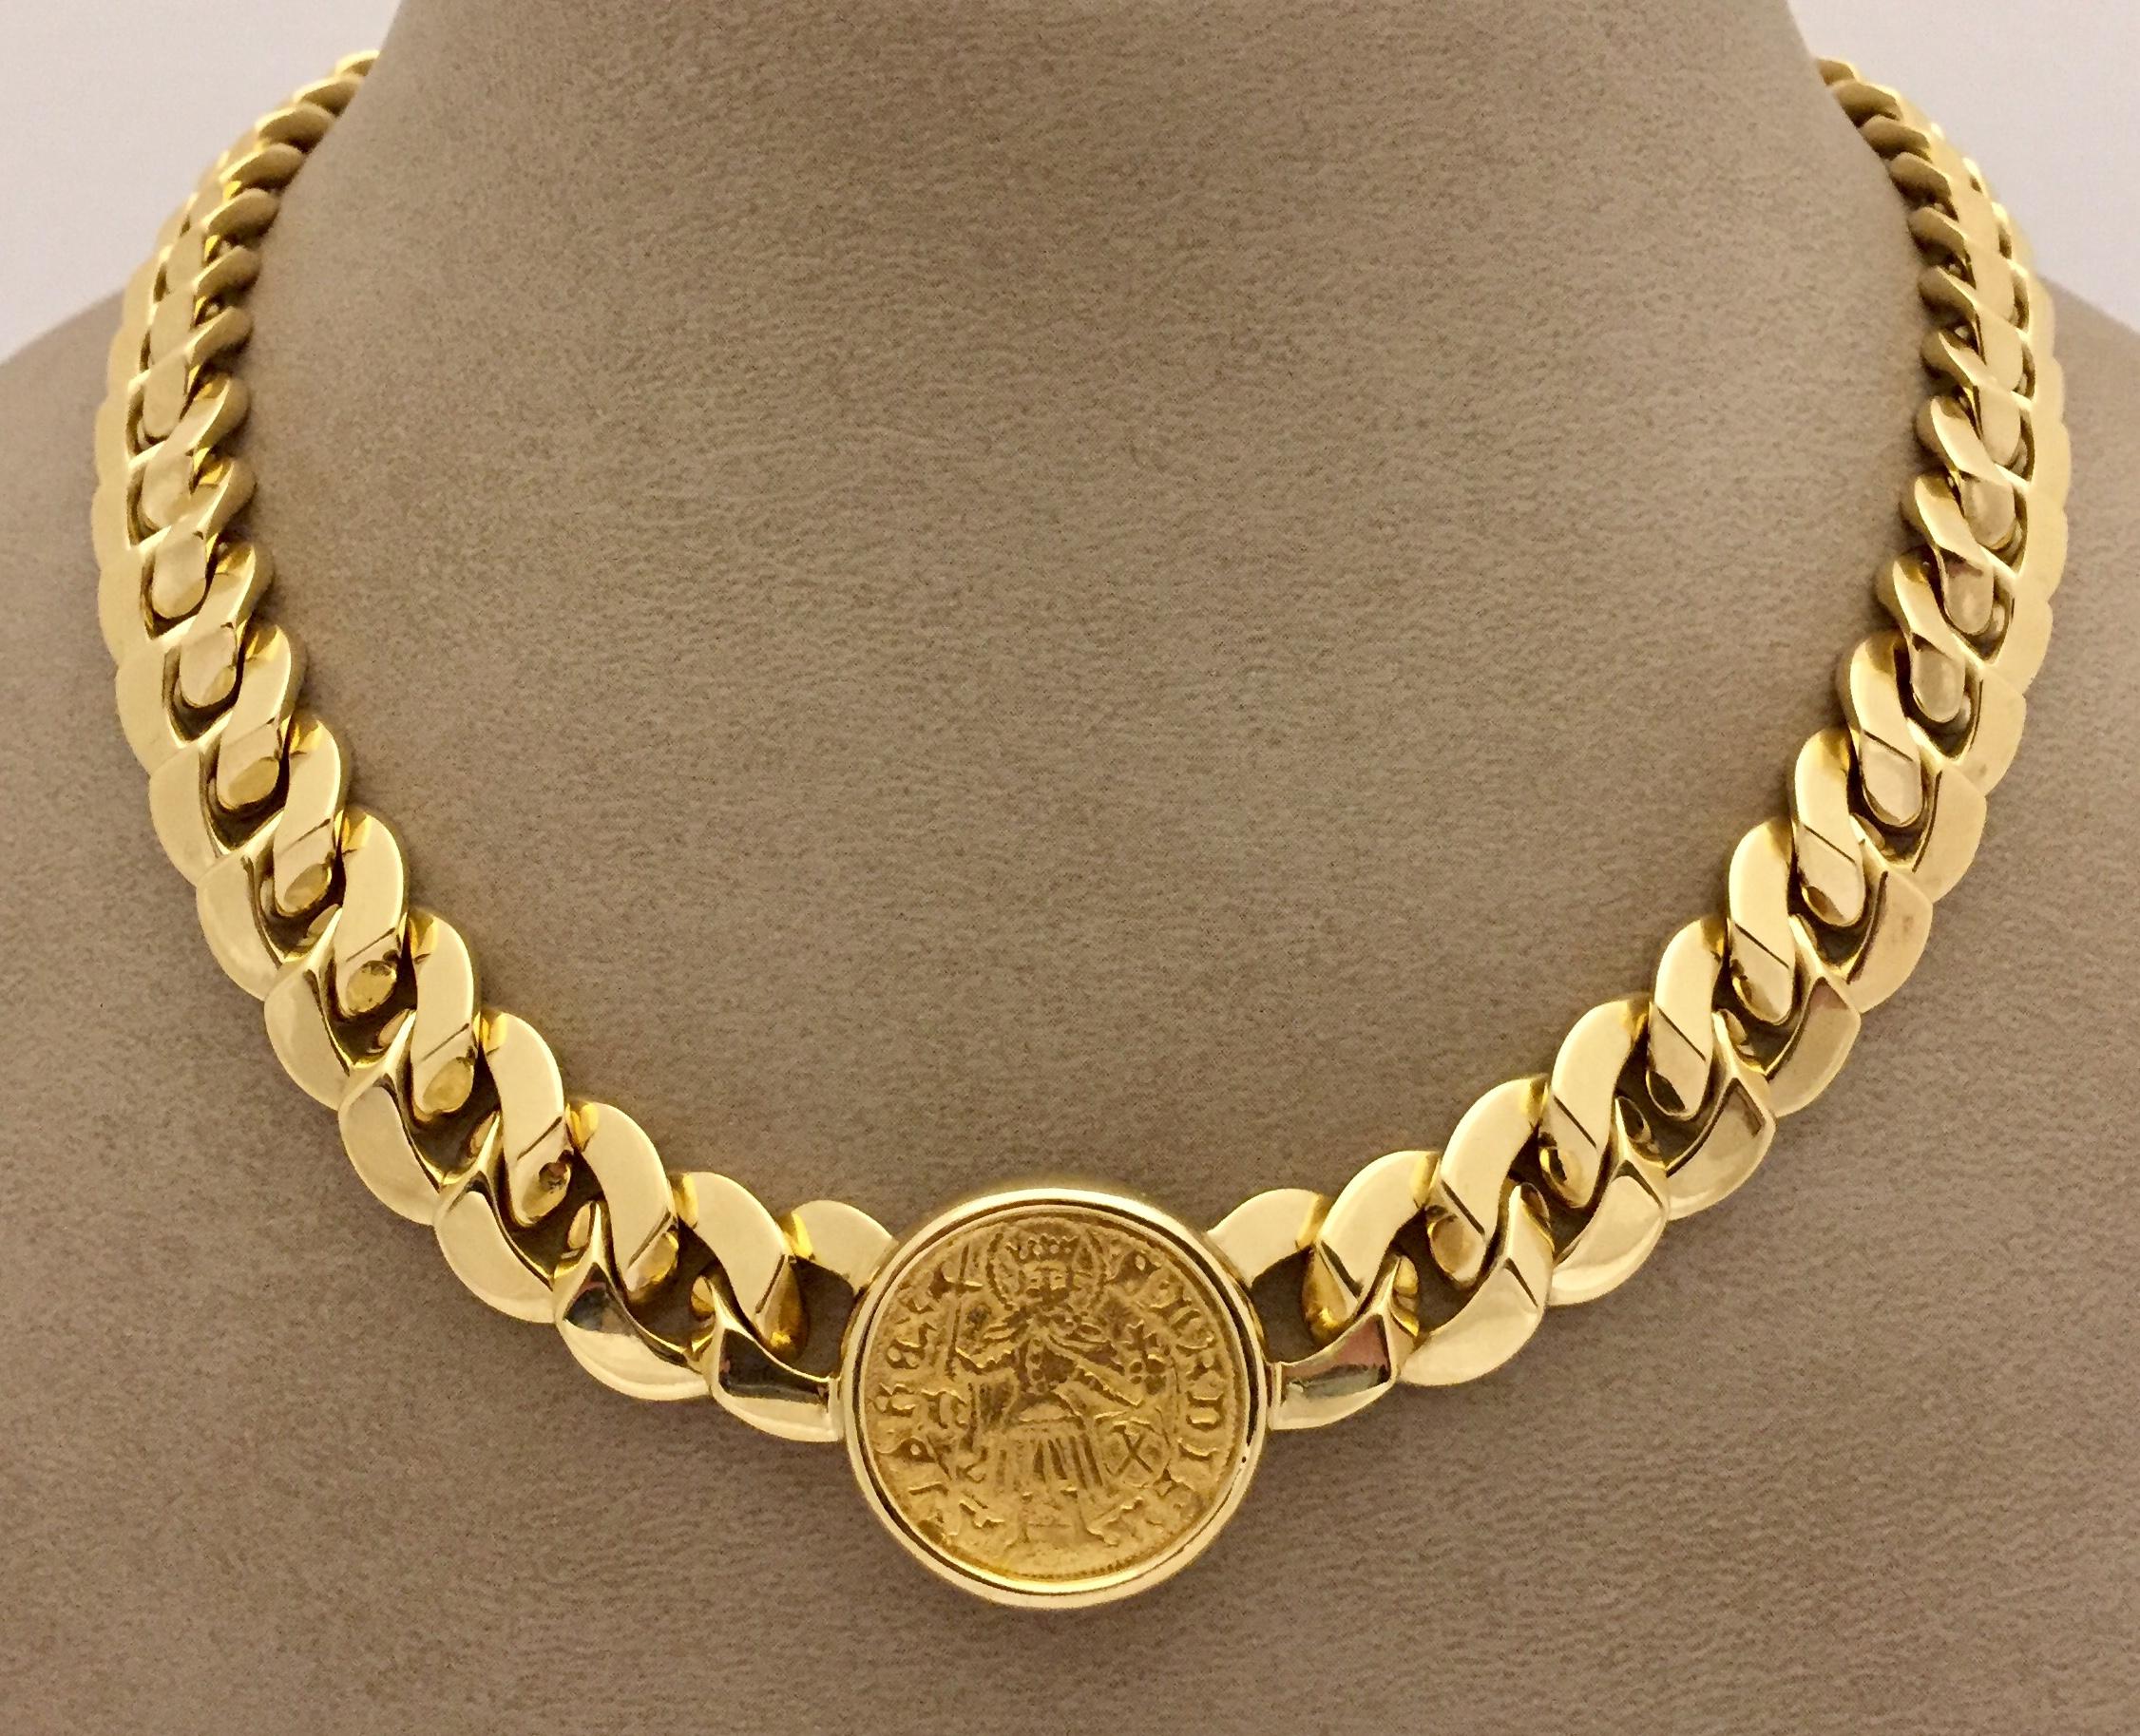 A massive coin necklace by BVLGARI. The 39 cm long 18k yellow gold graduated solid curb link chain suspending an ancient Roman gold coin mounted in a gold frame. A stunning example of the legendary Bulgari coin collection. Classic and bold, 145.75